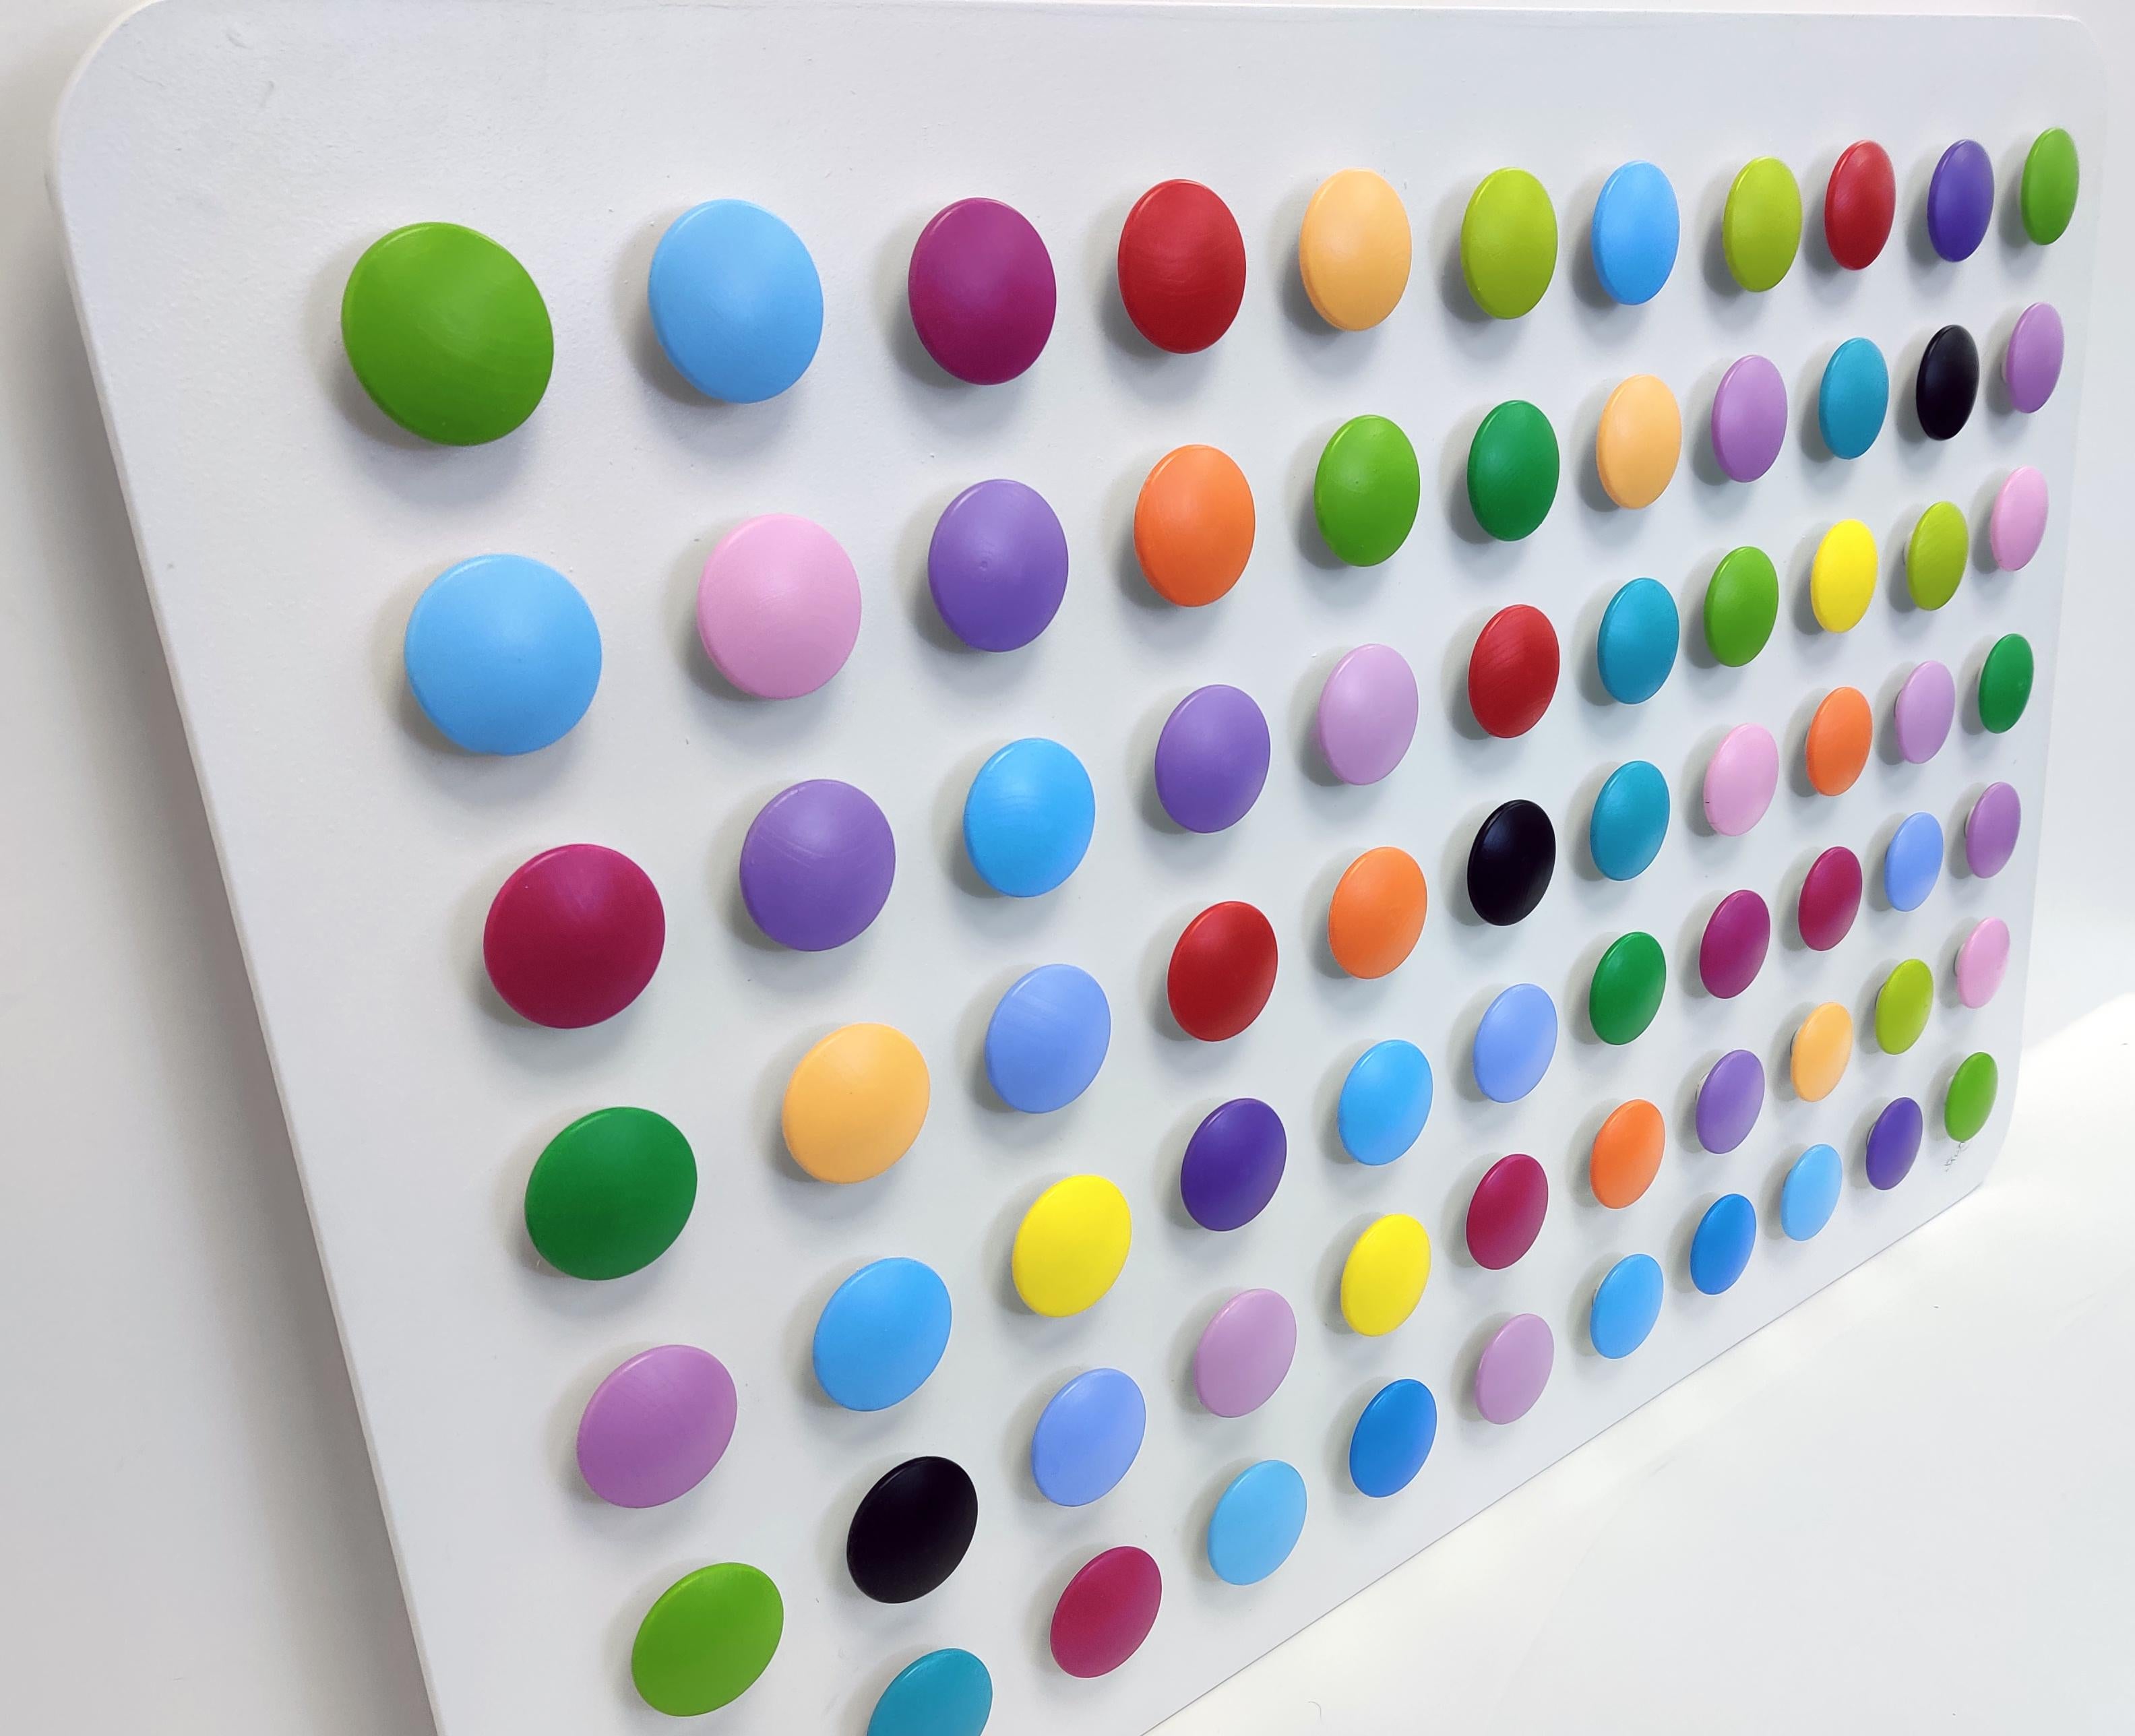 HOMAGE TO HIRST (DIMENSIONAL PIECES OF WOOD WITH MAGNETS) - Op Art Mixed Media Art by Stan Slutsky